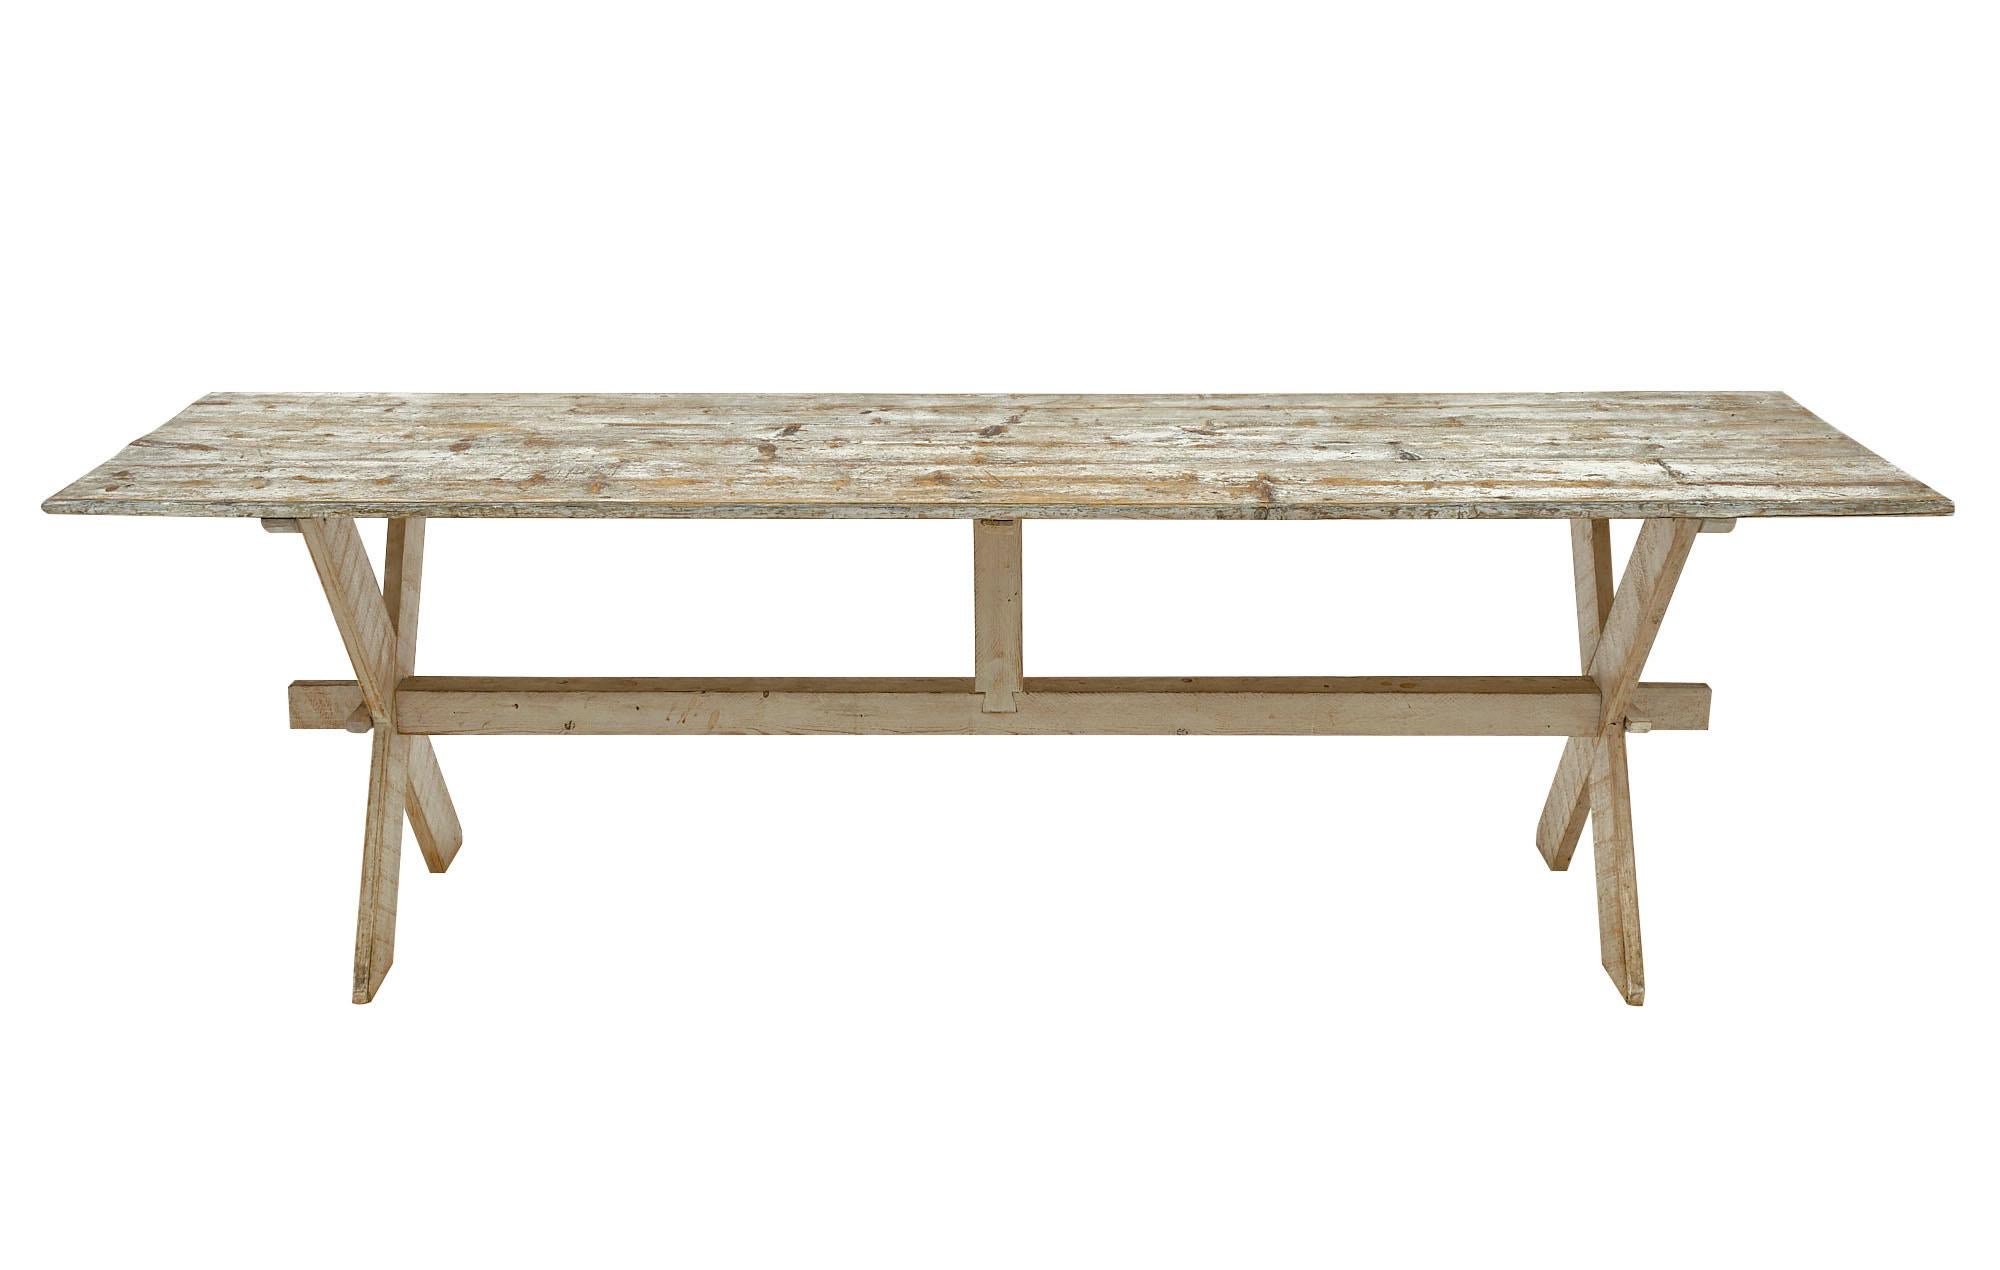 Early 20th Century Antique Farm Table from Sicily